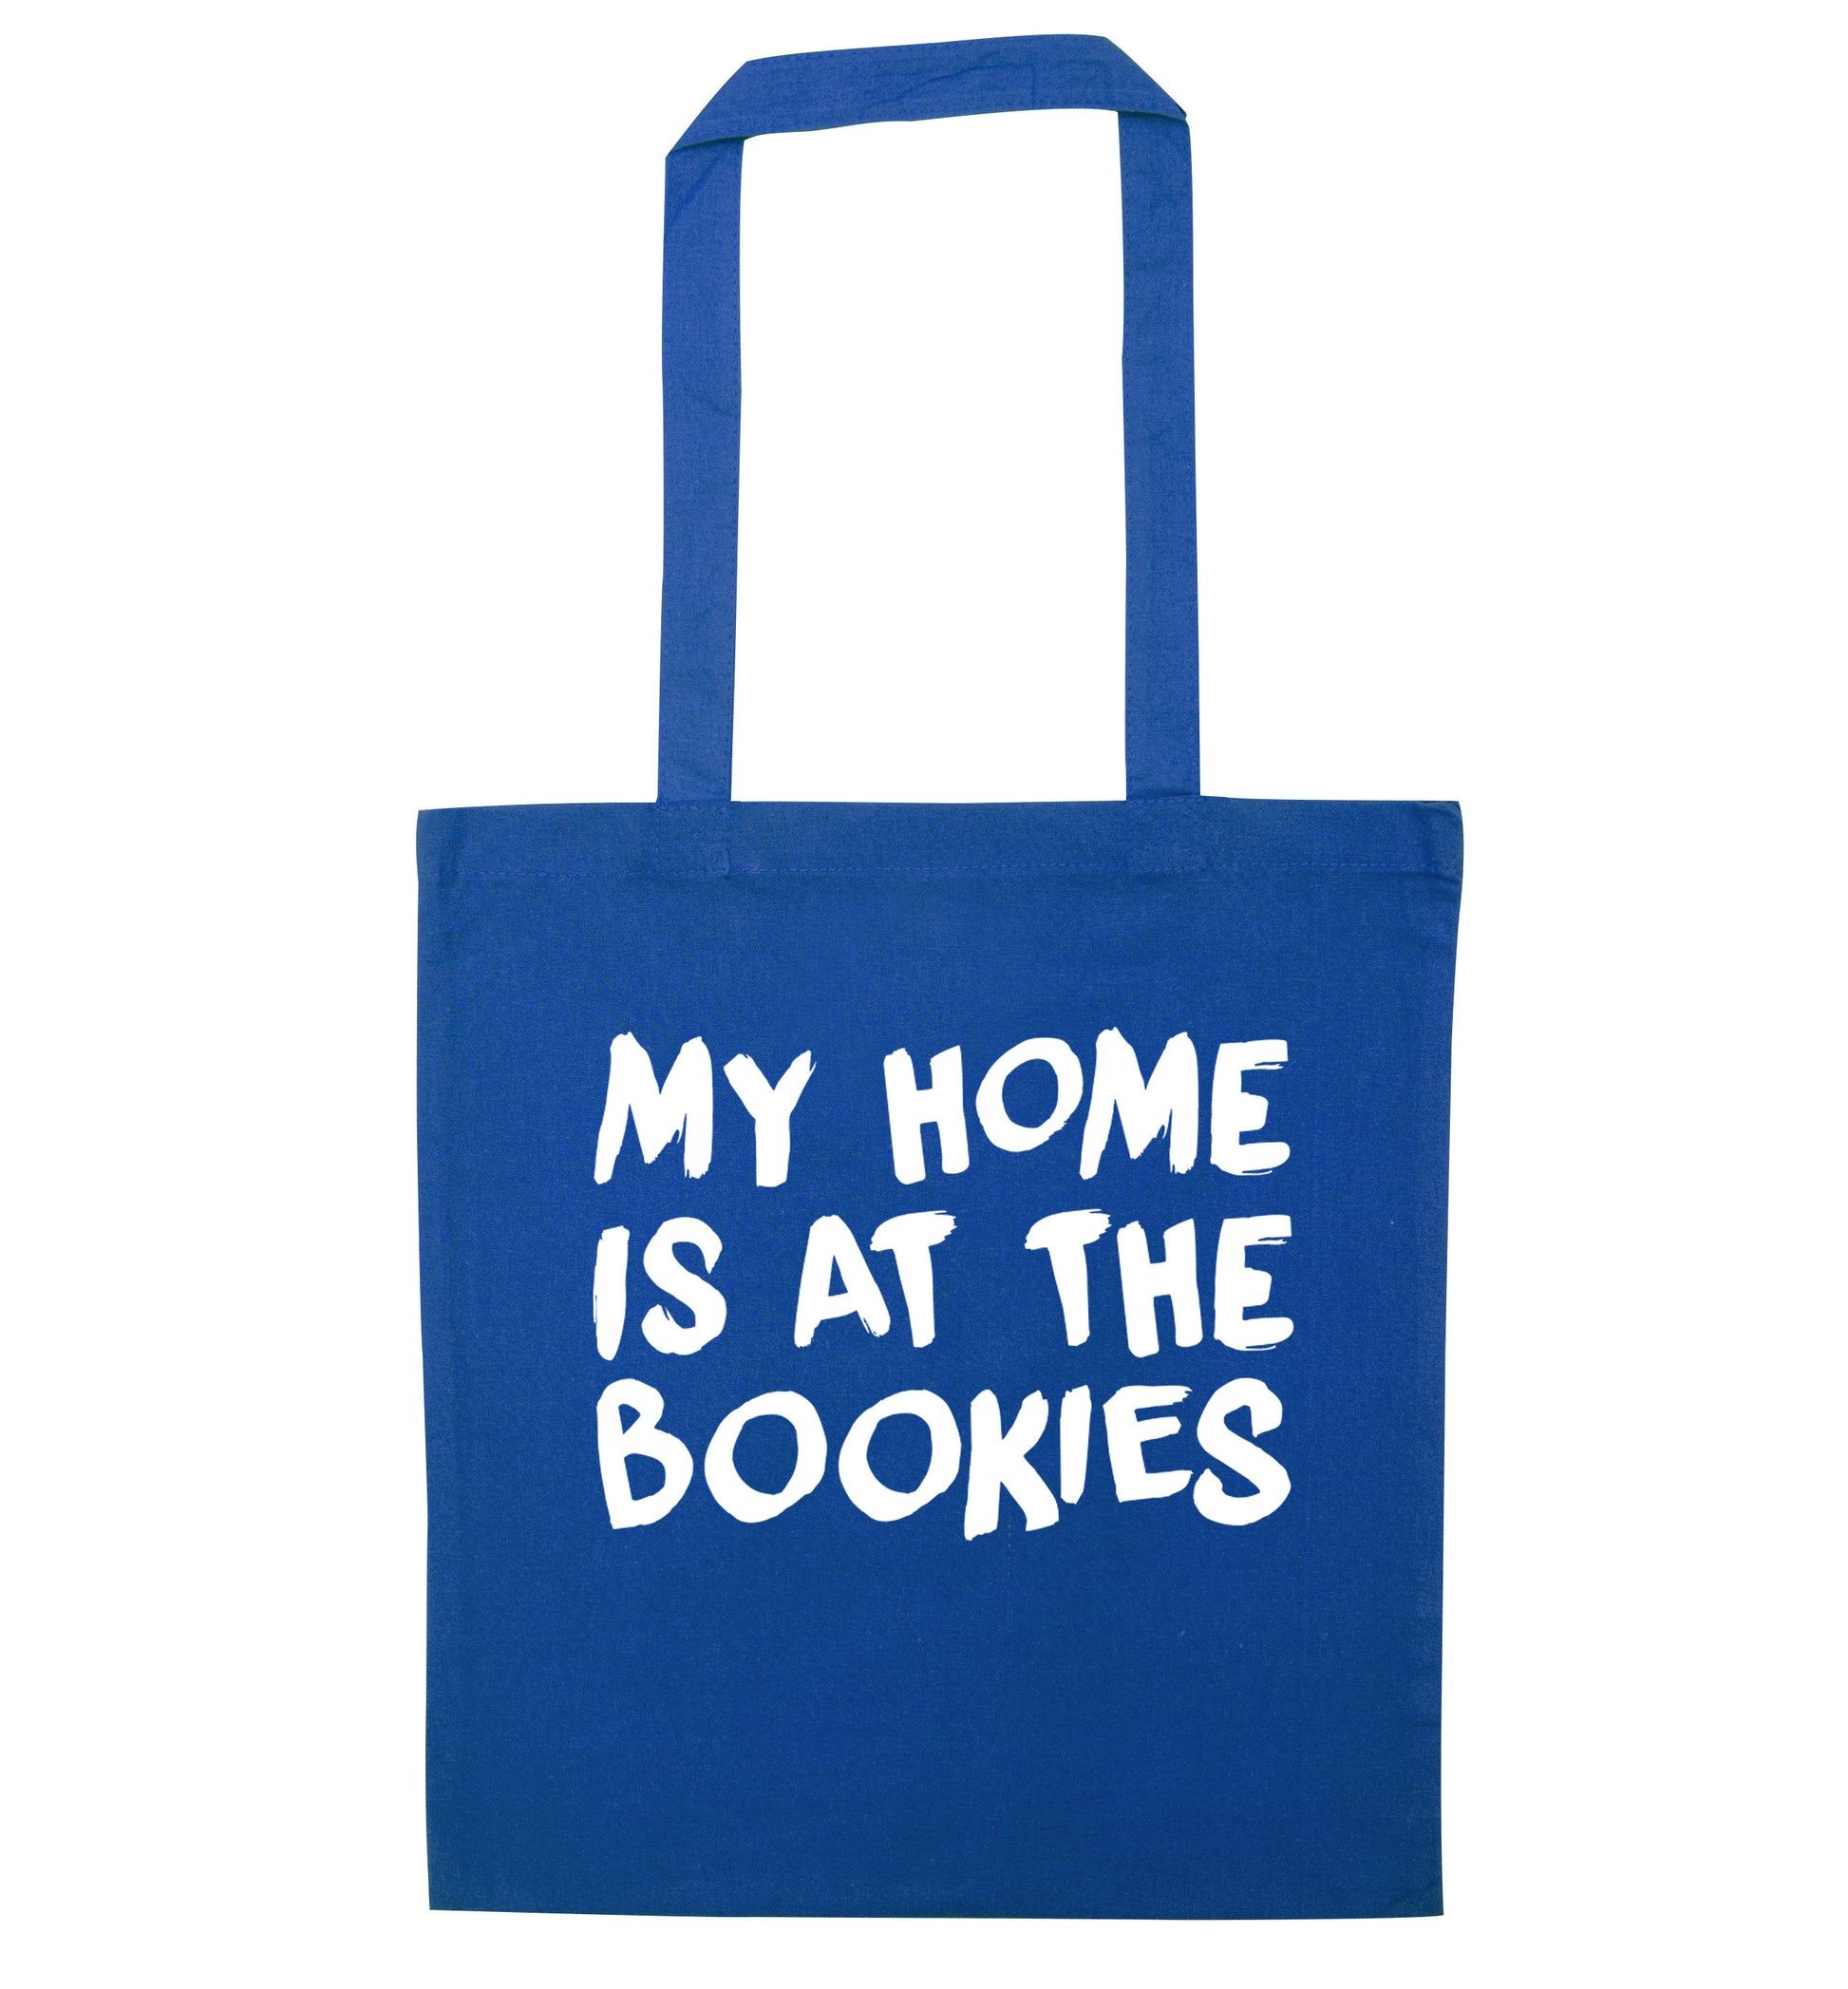 My home is at the bookies blue tote bag